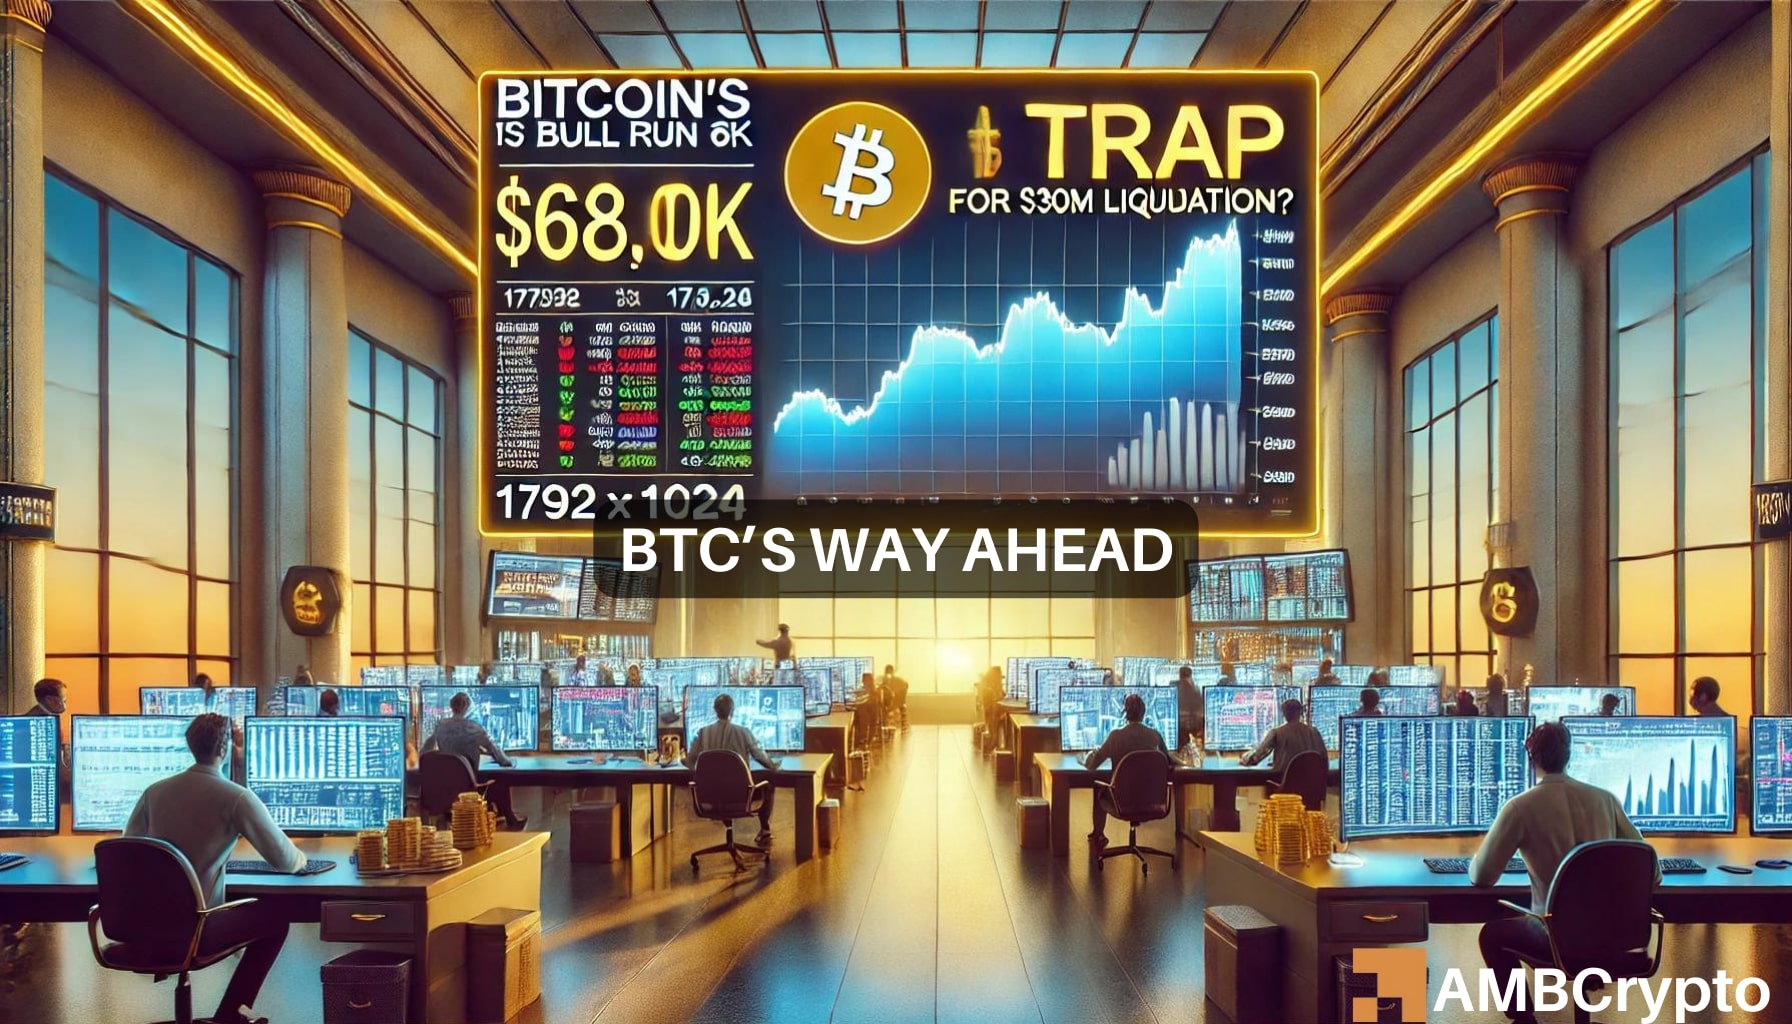 Bitcoin’s bull run to $68K: A trap for $30M in liquidation?